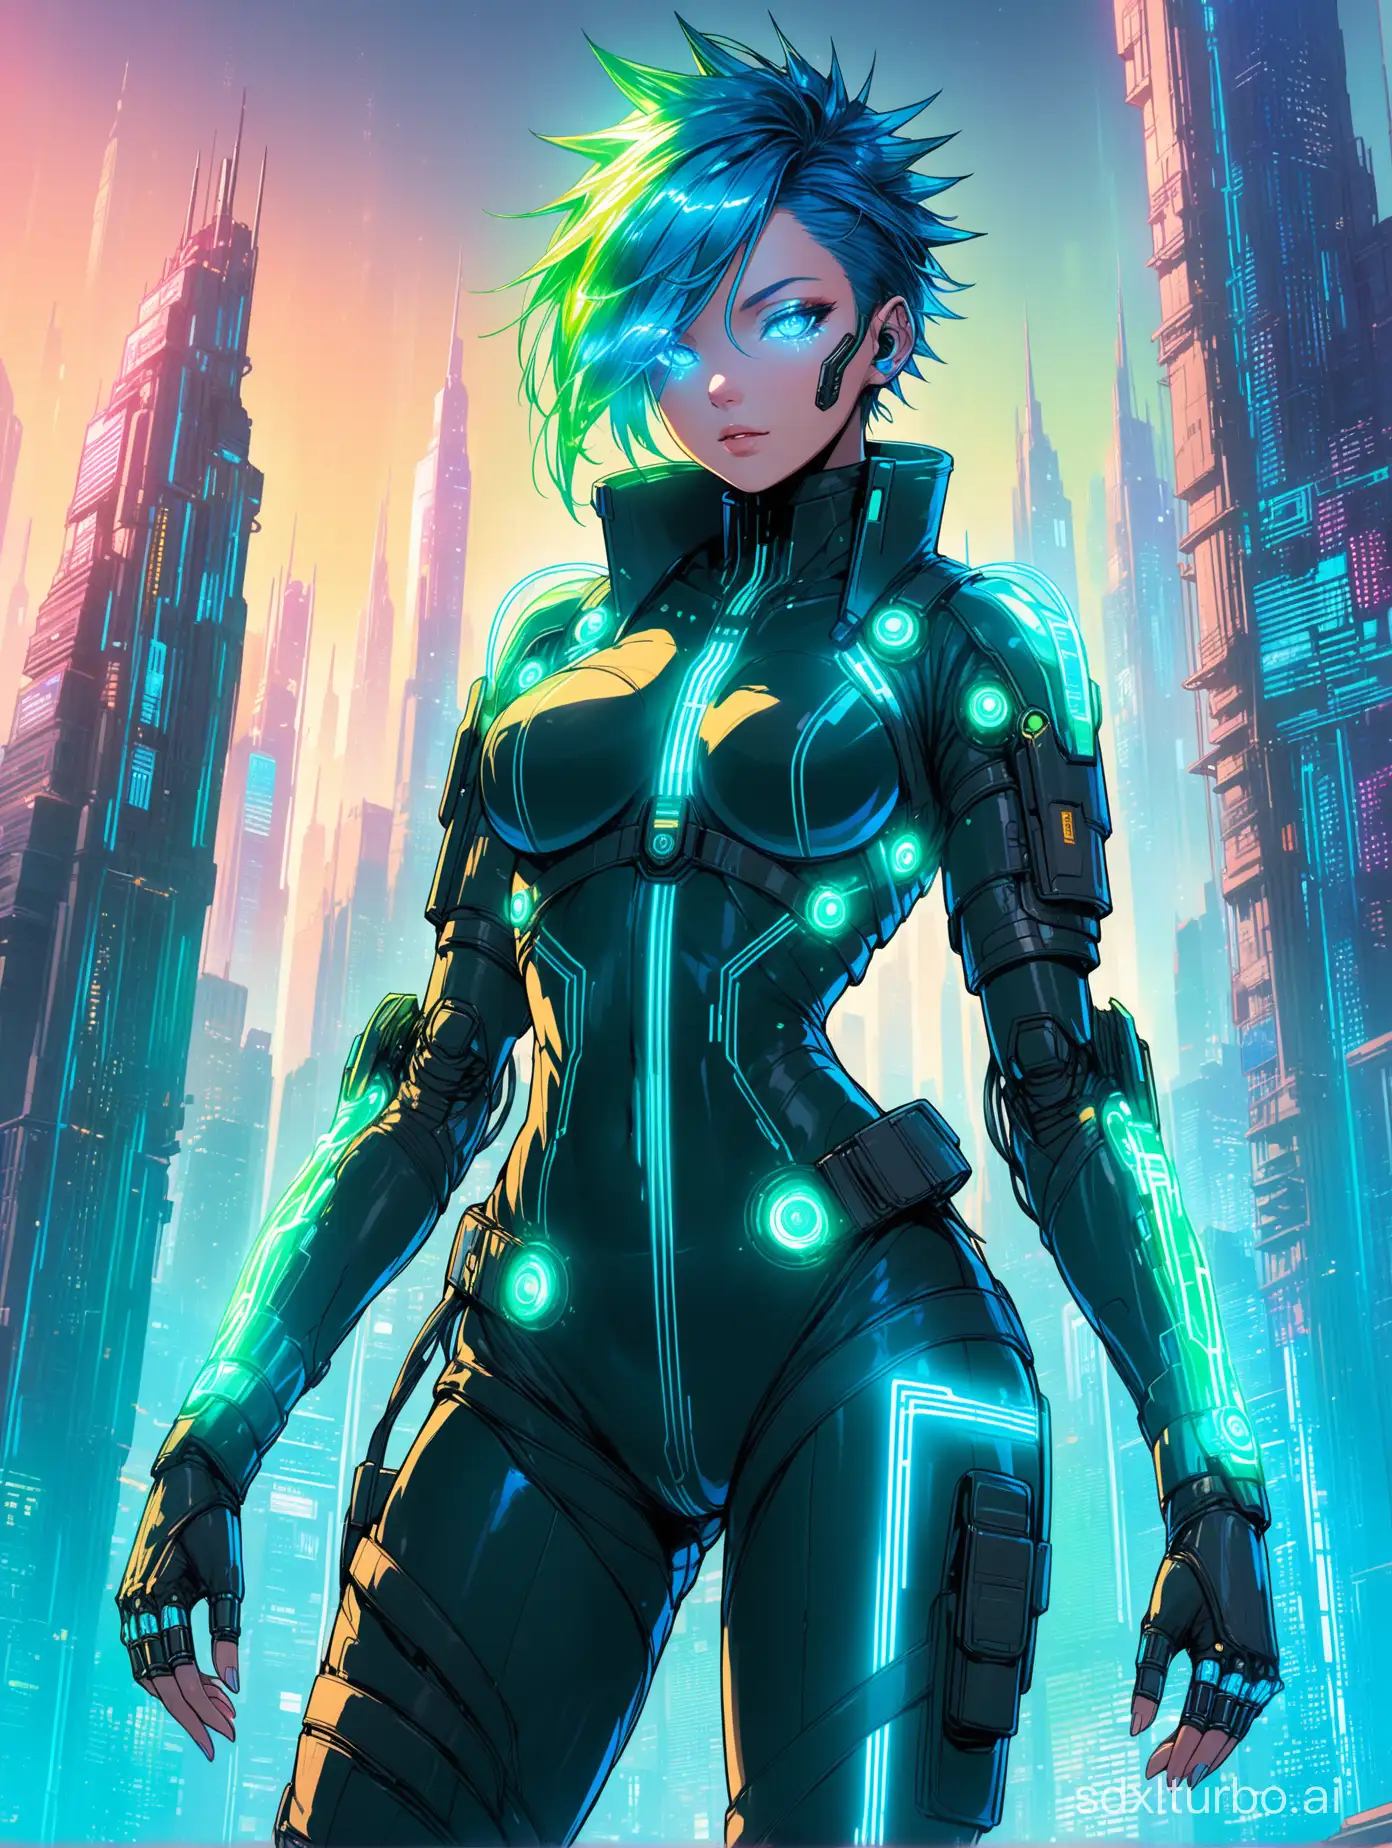 A futuristic cyborg woman with glowing blue circuits and wires visible beneath her translucent skin, in a Cyberpunk style. Her short, spiky hair is a vibrant shade of electric blue, and her eyes are an piercing bright green. She wears a sleek black jumpsuit adorned with neon accents, complete with a utility belt at her waist and a pair of high-tech gauntlets on her arms. In the background, a cityscape of towering skyscrapers and holographic advertisements stretches out into the distance, bathed in a warm, pulsing light. The atmosphere is one of dynamic energy and constant evolution